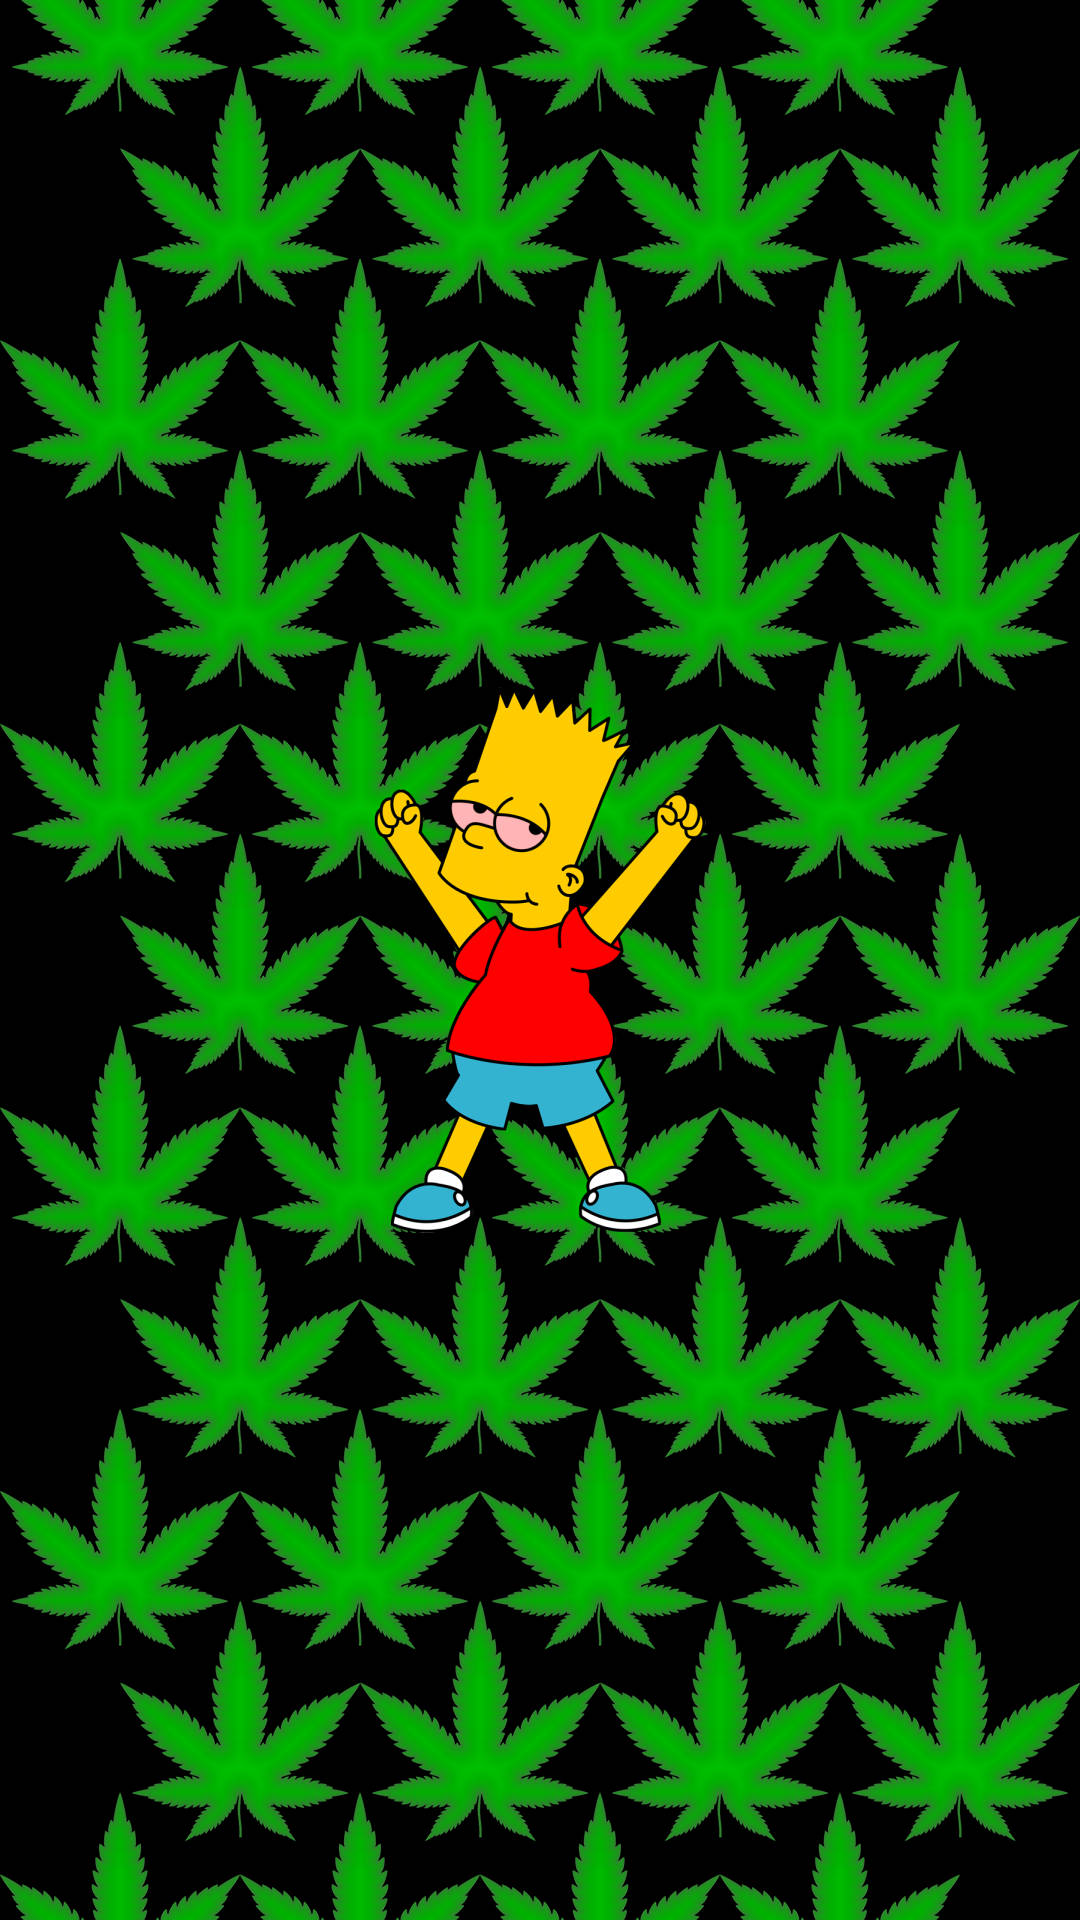 Simpsons Cartoon Weed Picture